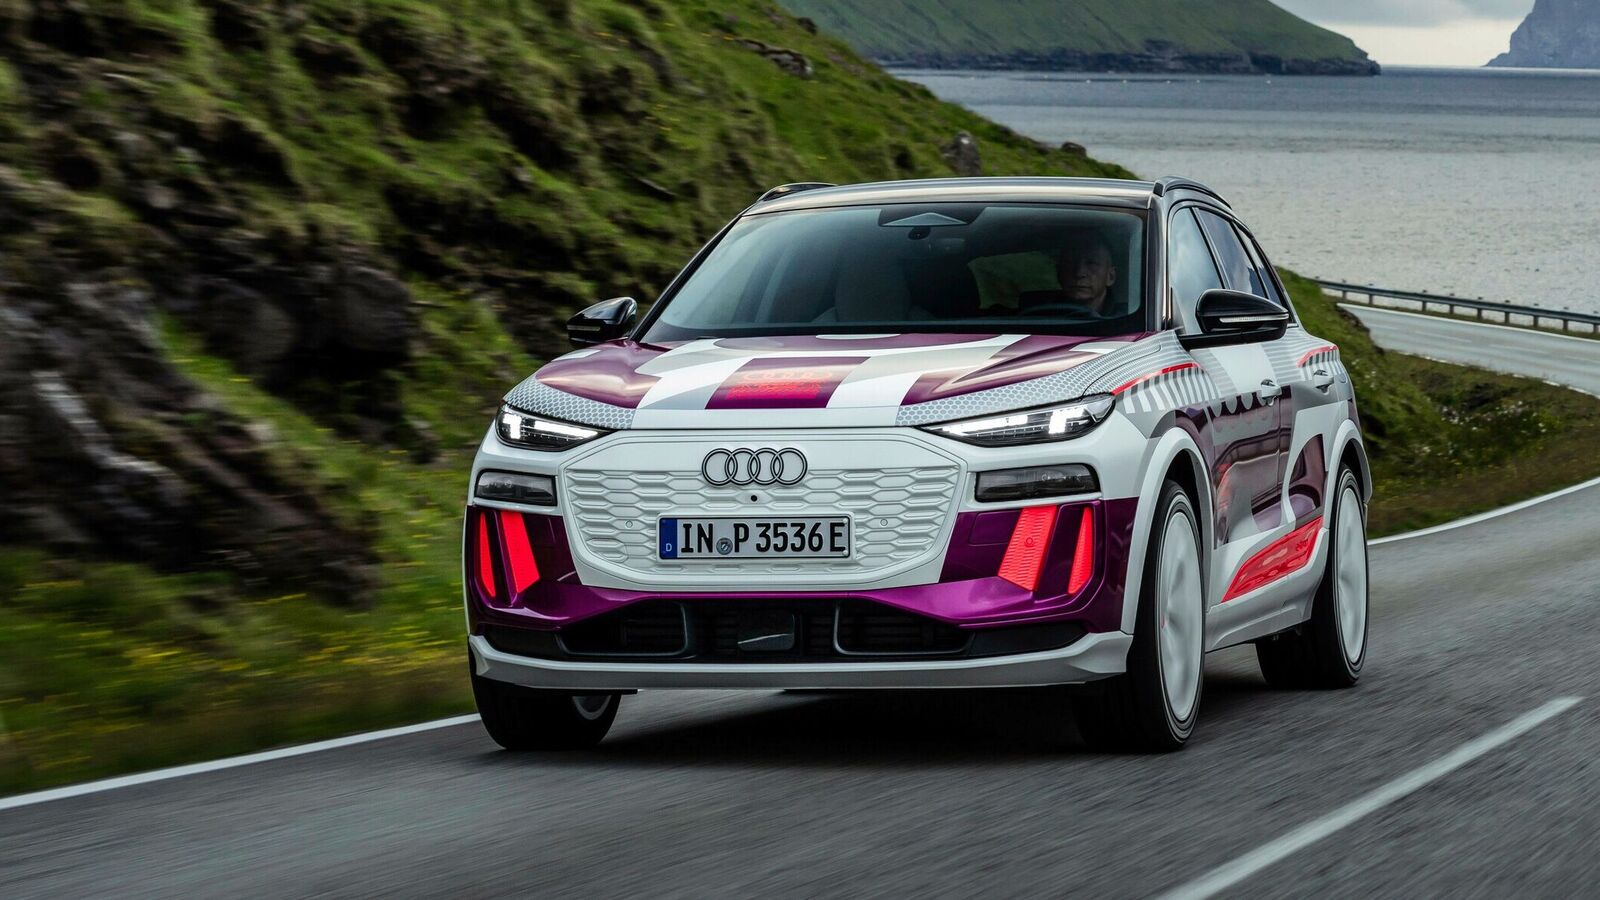 Audi reveals Q6 e-tron electric SUV Concept ahead of launch later this year